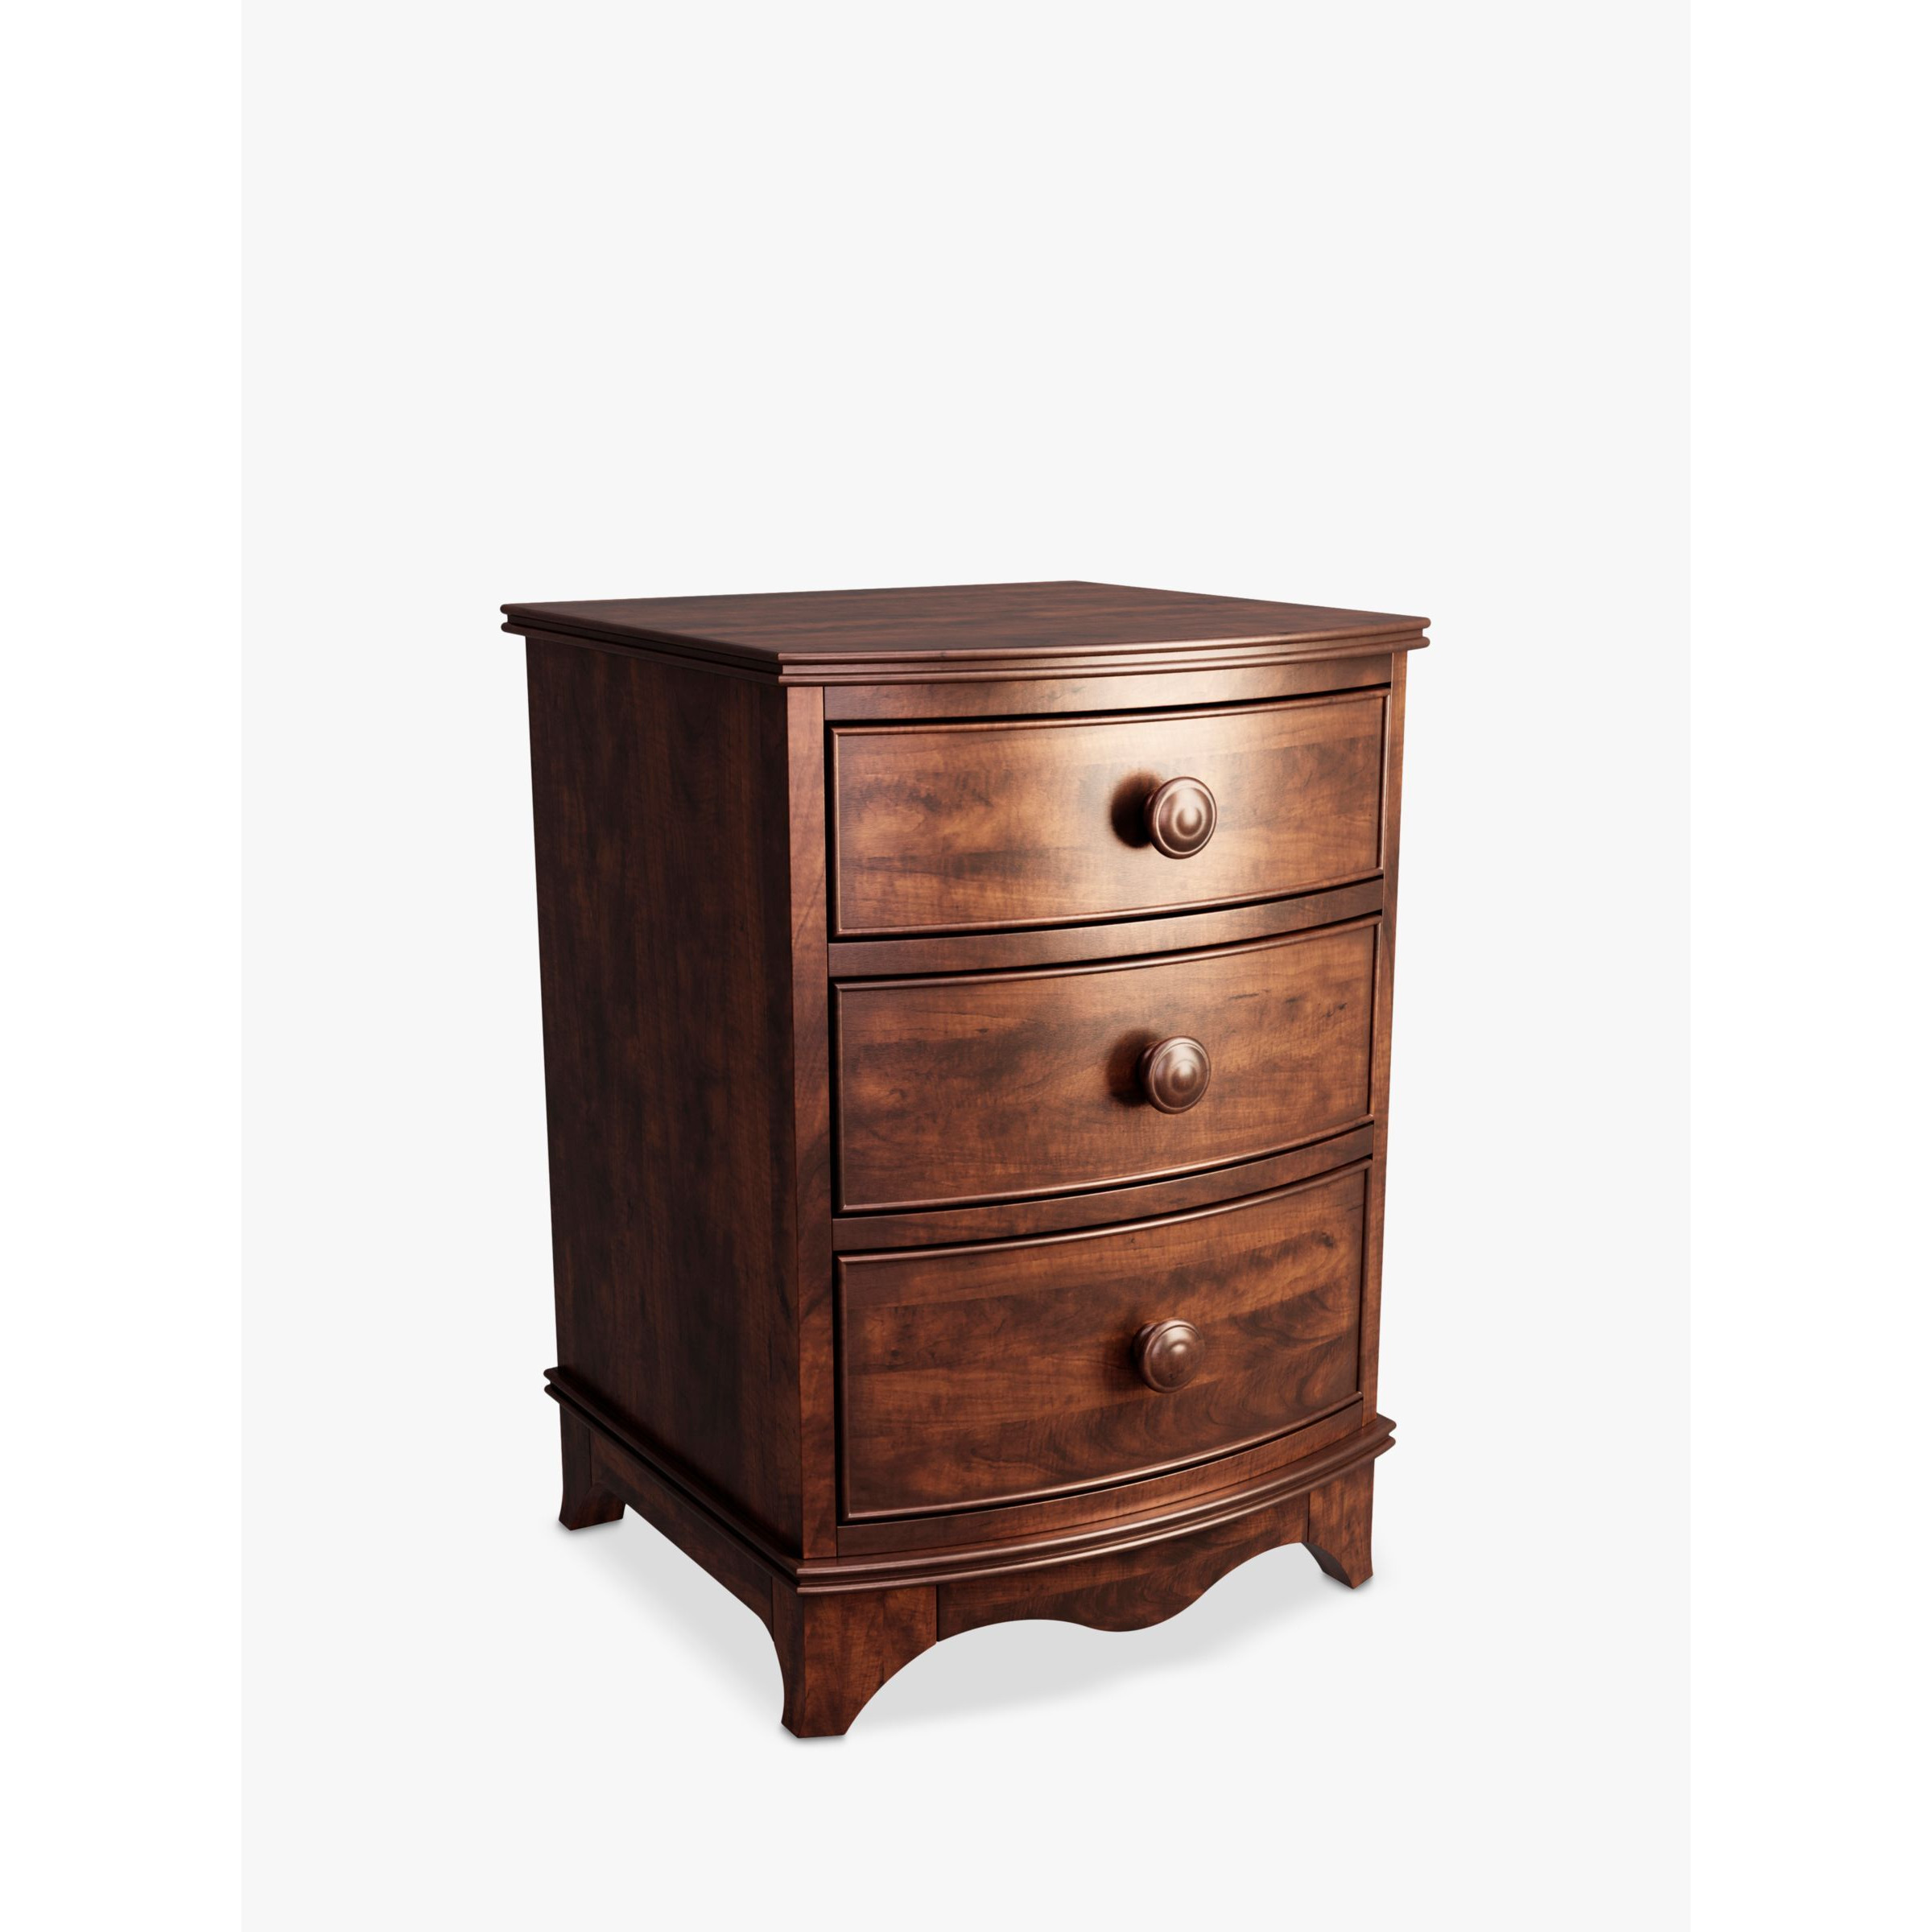 Laura Ashley Broughton Bedside Table, Brown - image 1